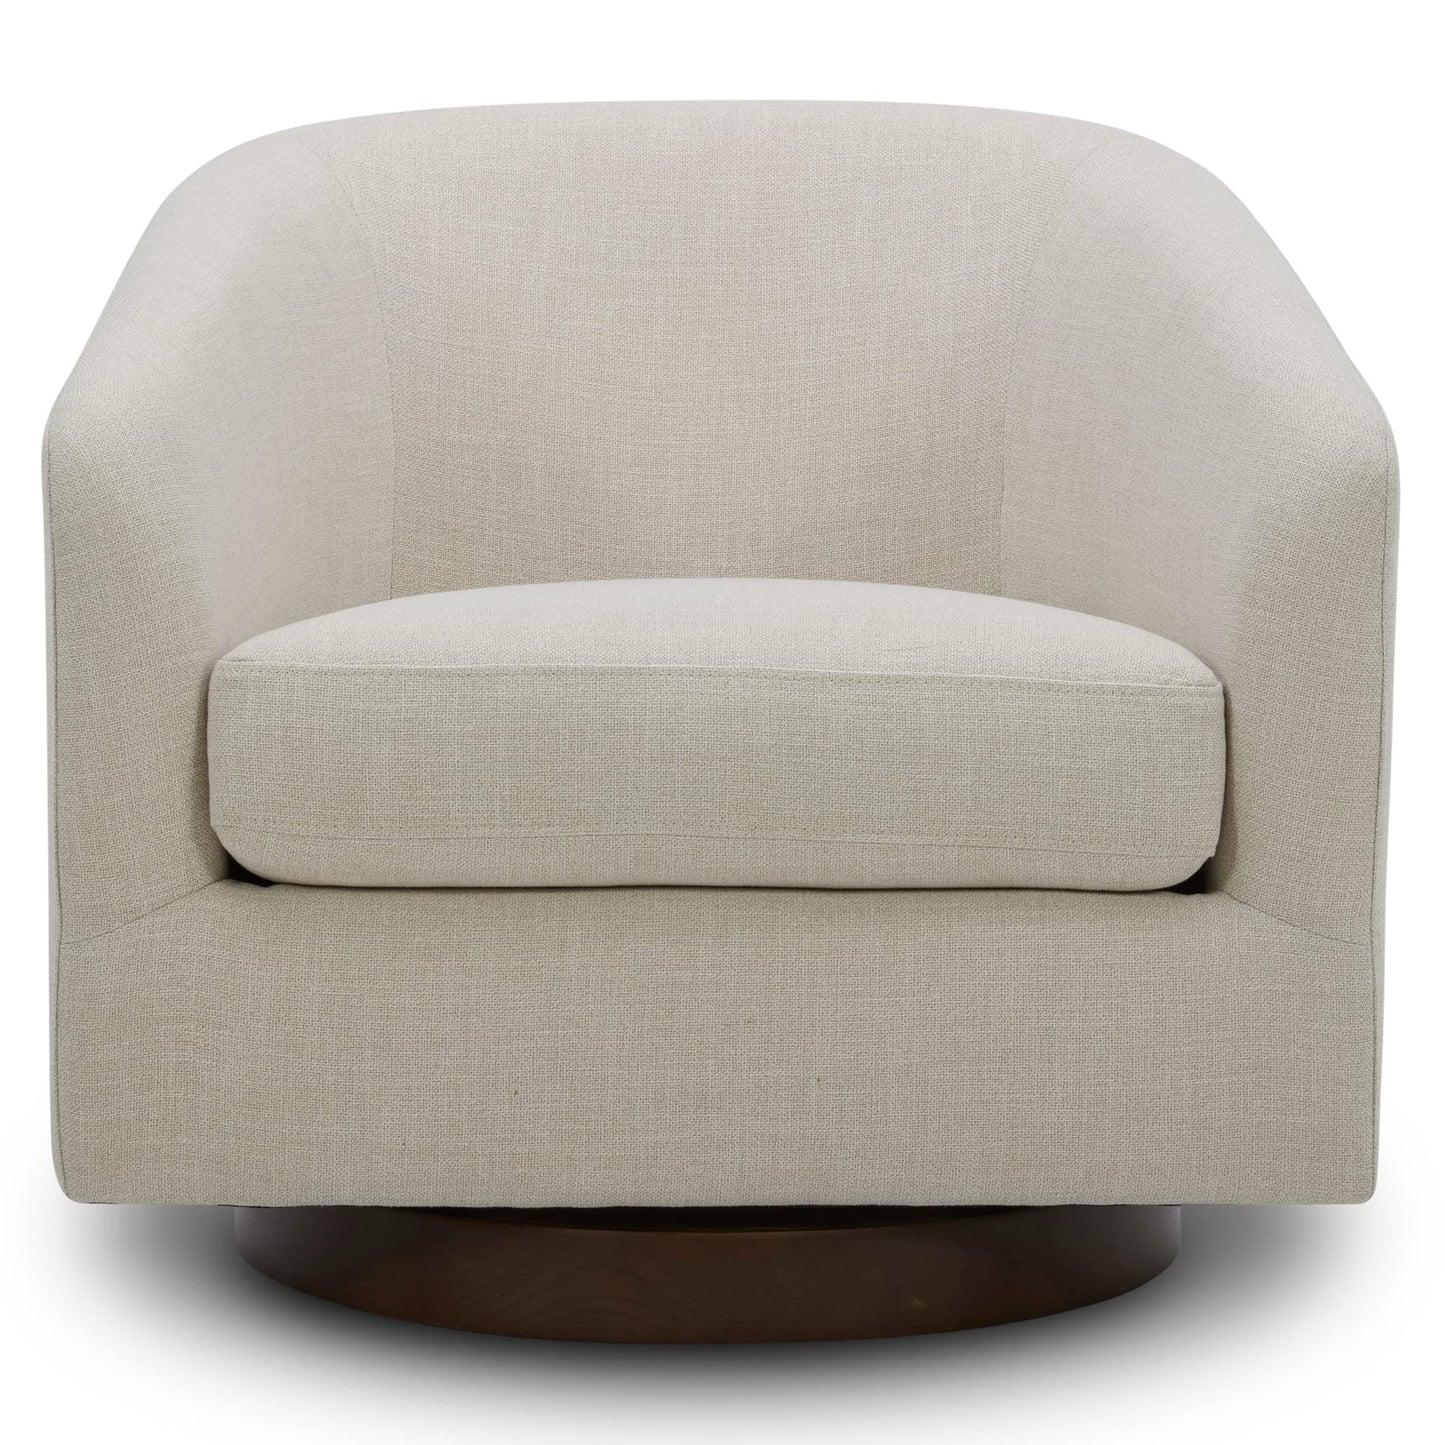 CHITA Swivel Accent Chair Armchair, Round Barrel Chair in Fabric for Living Room Bedroom, Linen